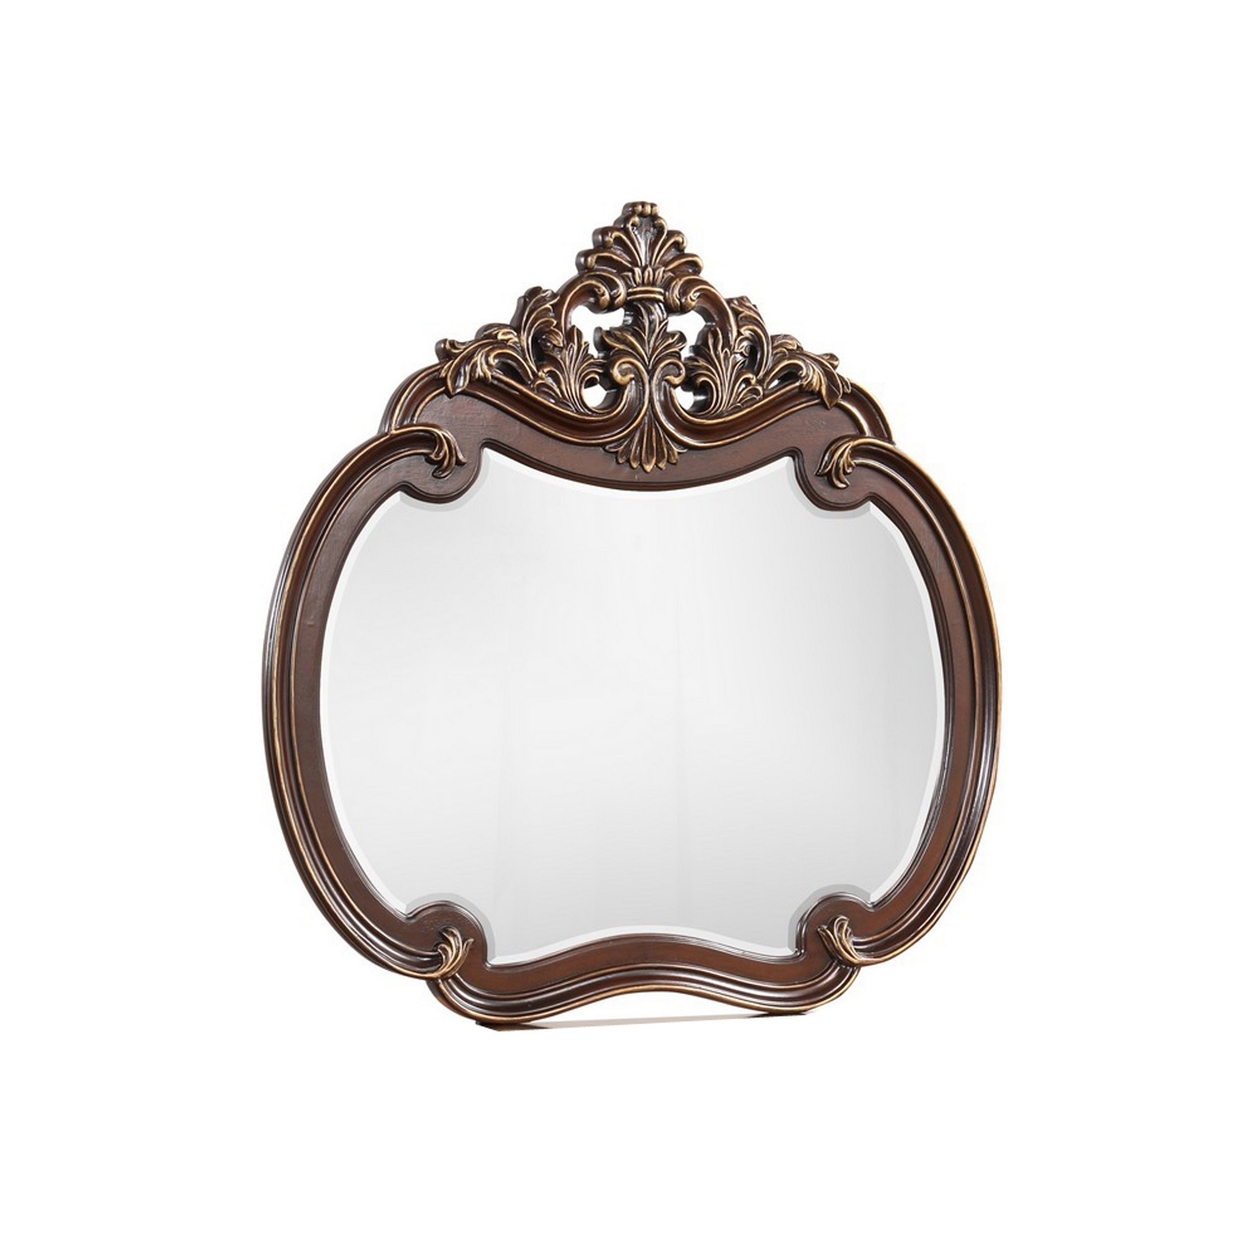 Mike 48 X 49 Buffet Mirror, Round Wood Frame Carved Crown Top, Cherry Brown - Saltoro Sherpi